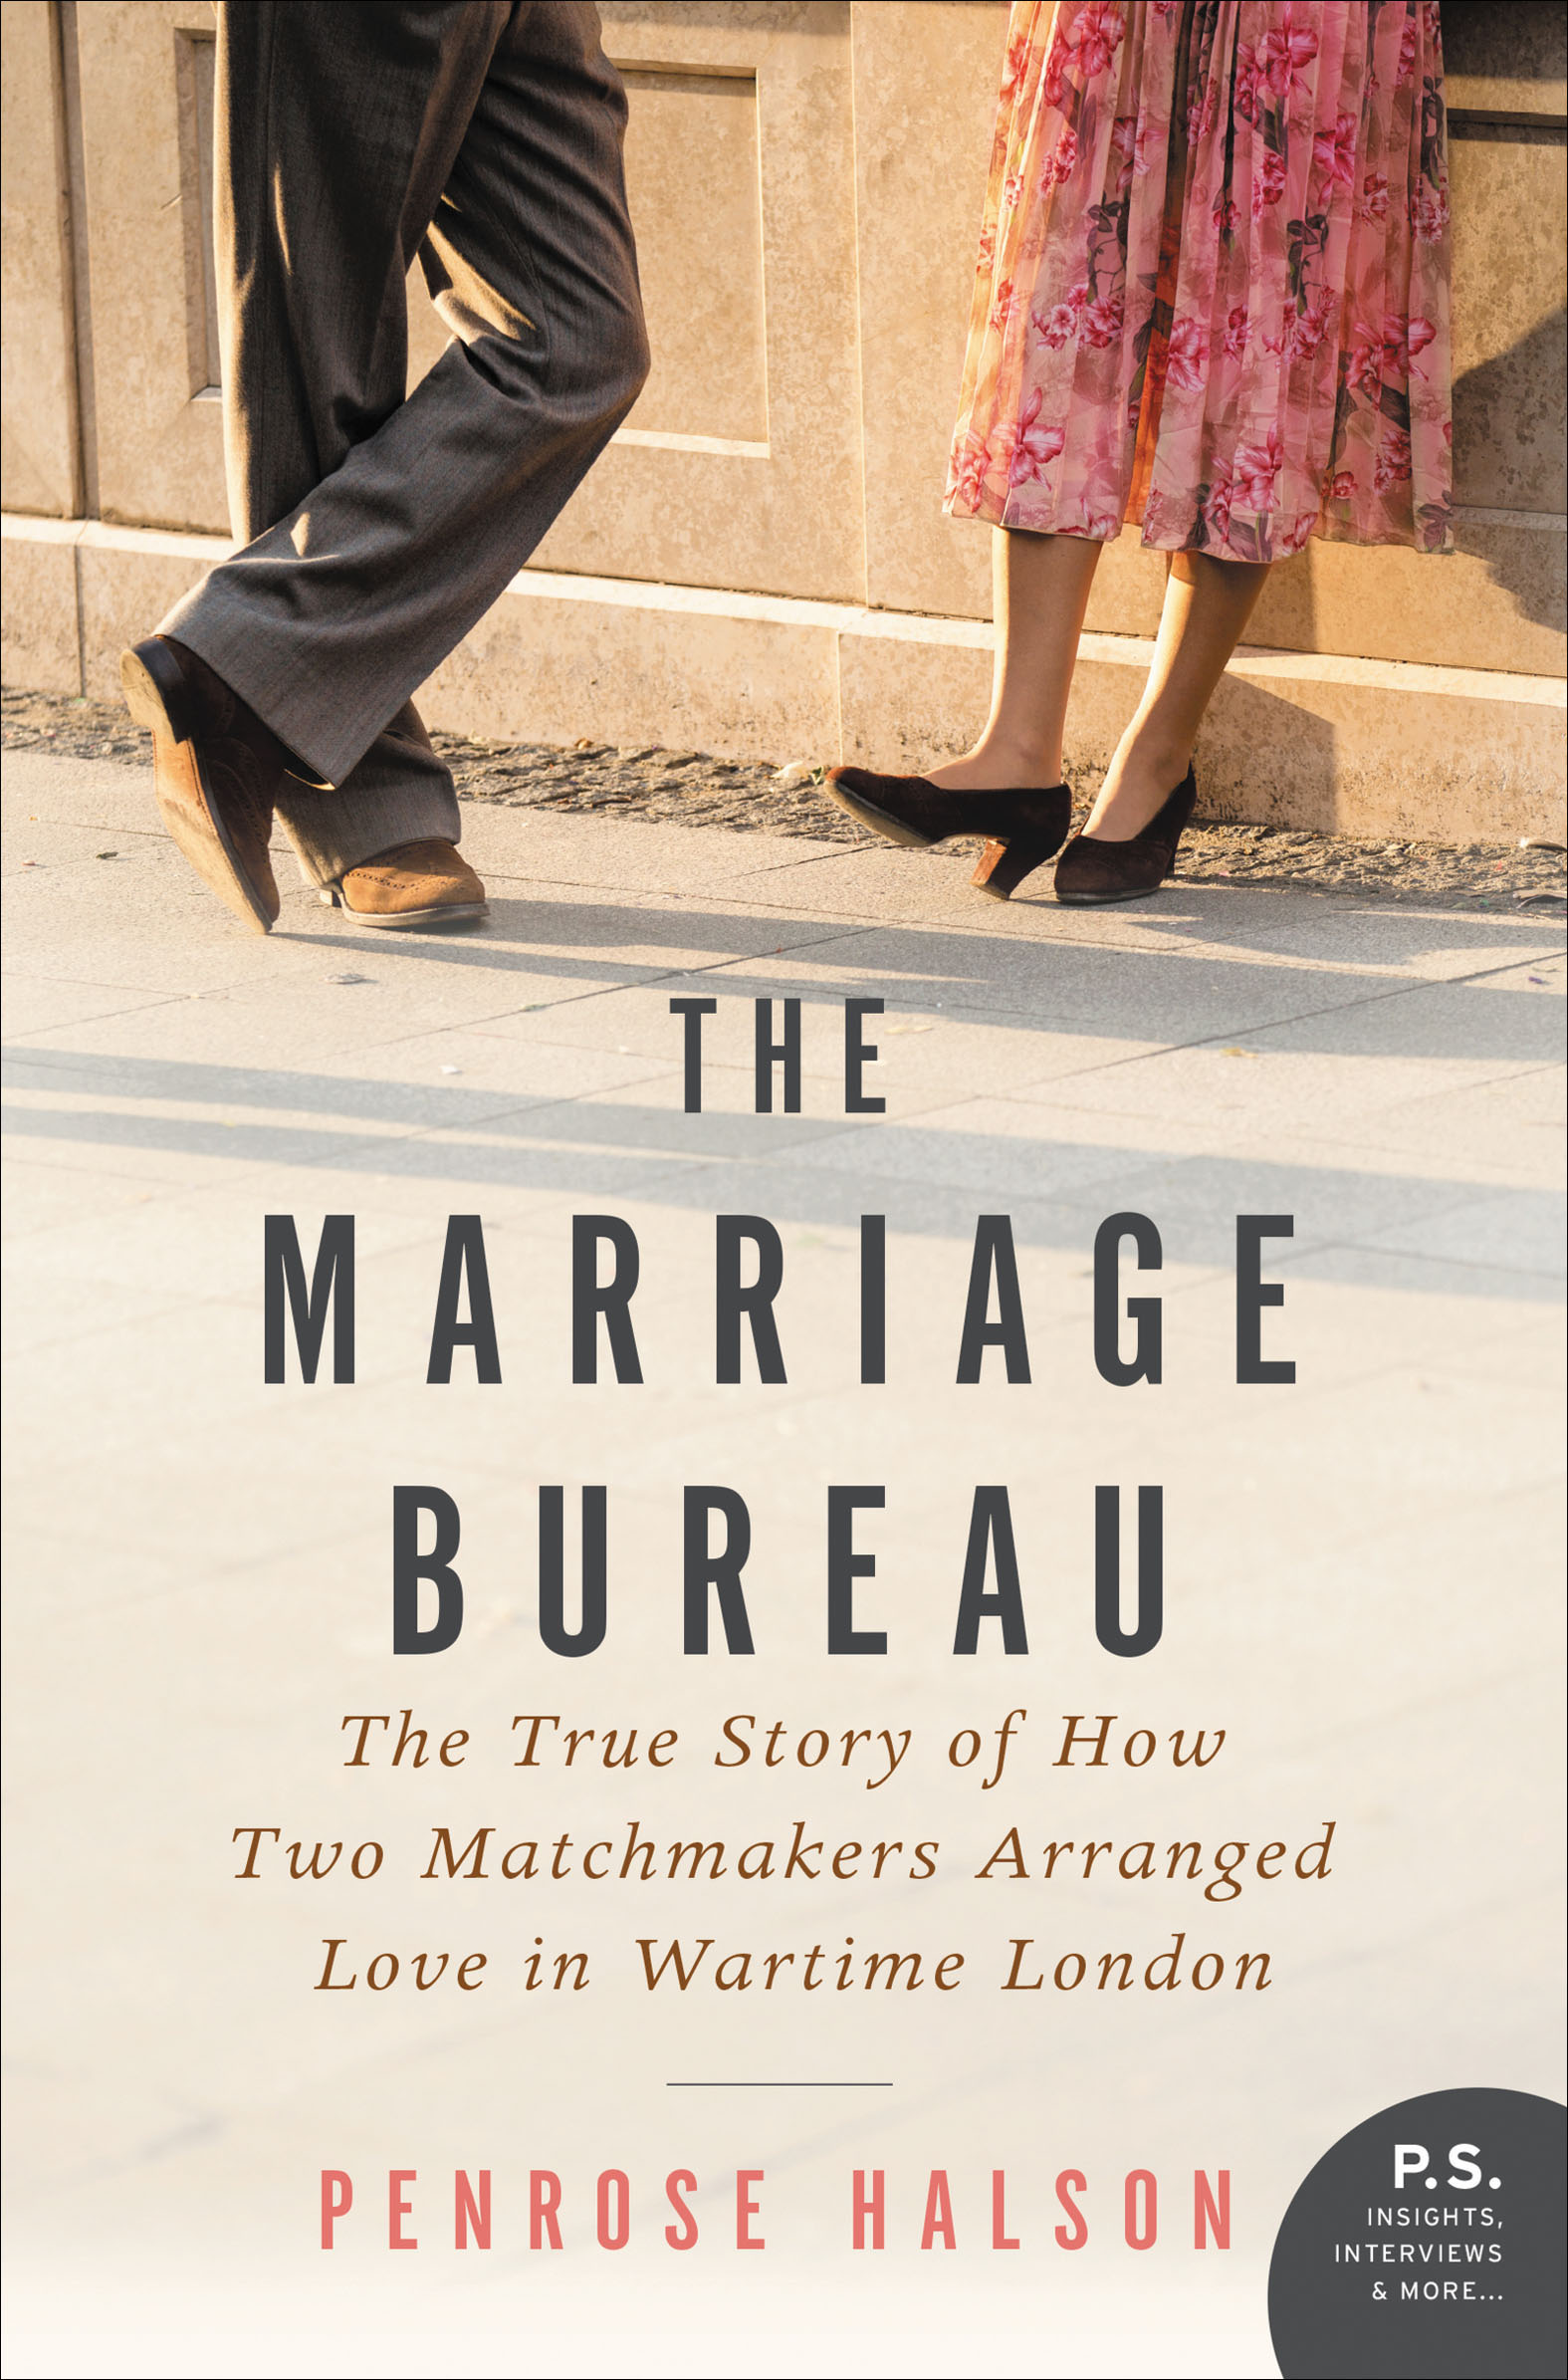 The marriage bureau the true story of how two matchmakers arranged love in wartime London cover image